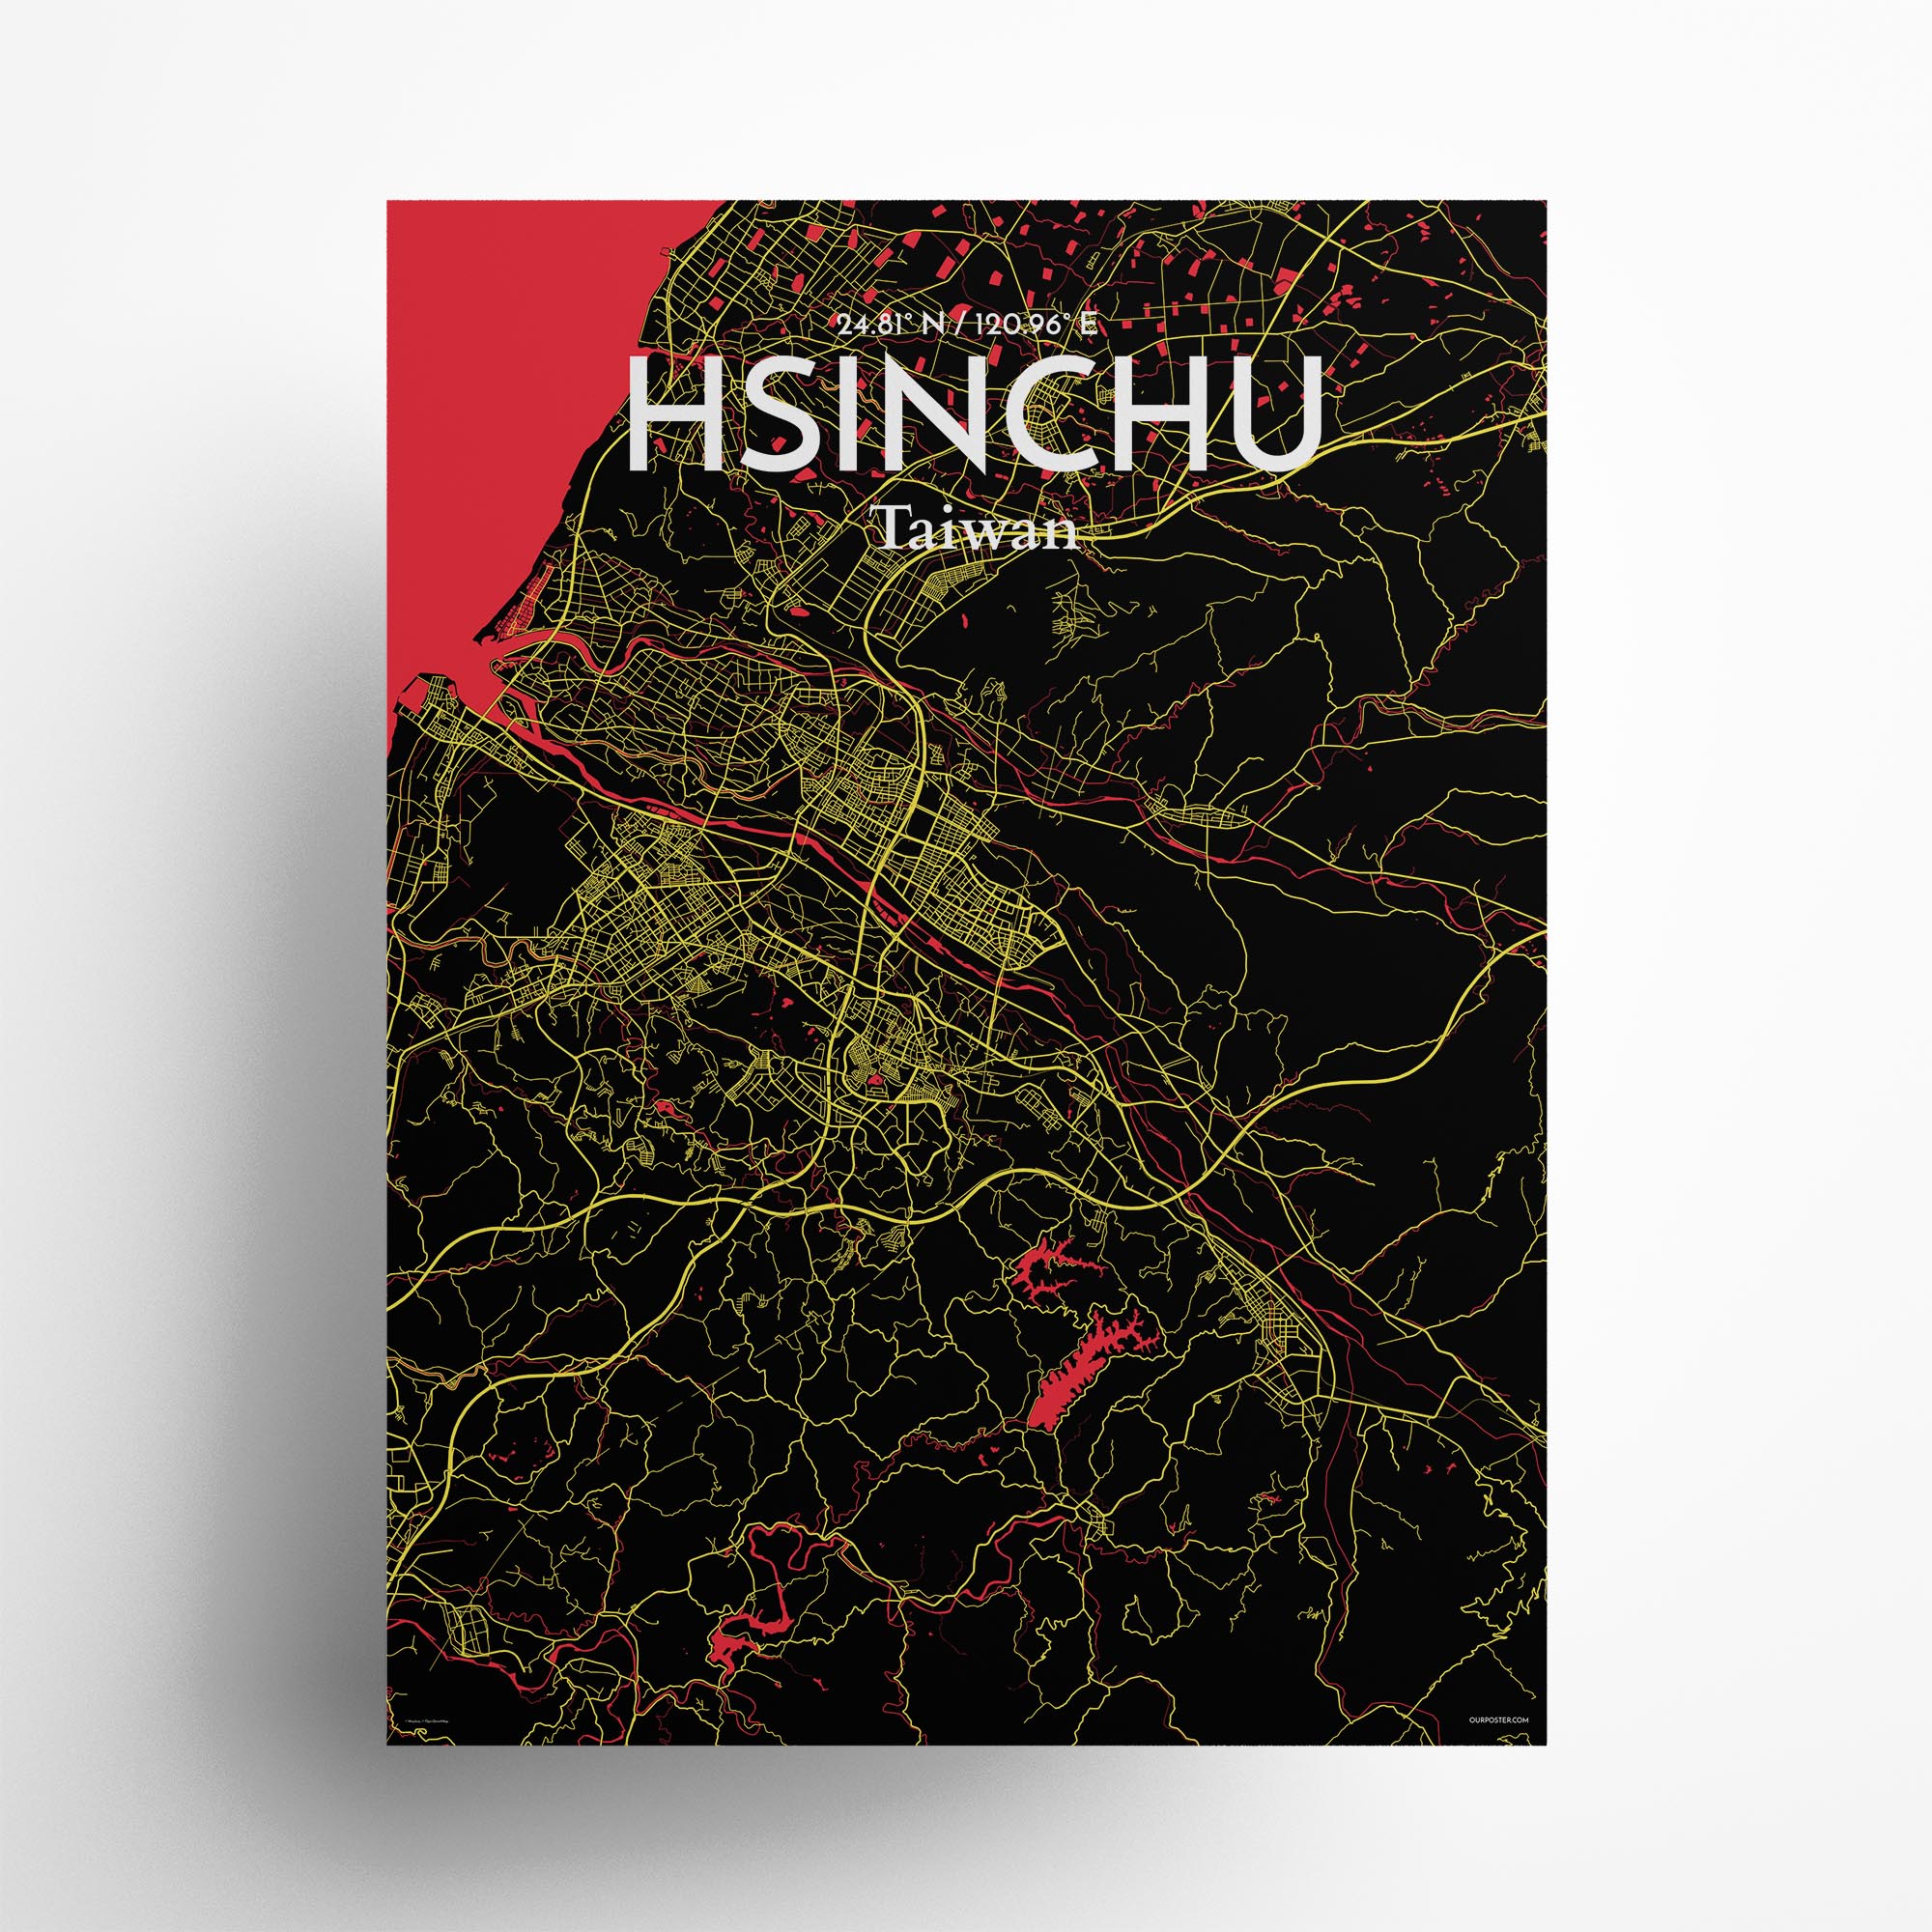 Hsinchu city map poster in Contrast of size 18" x 24"